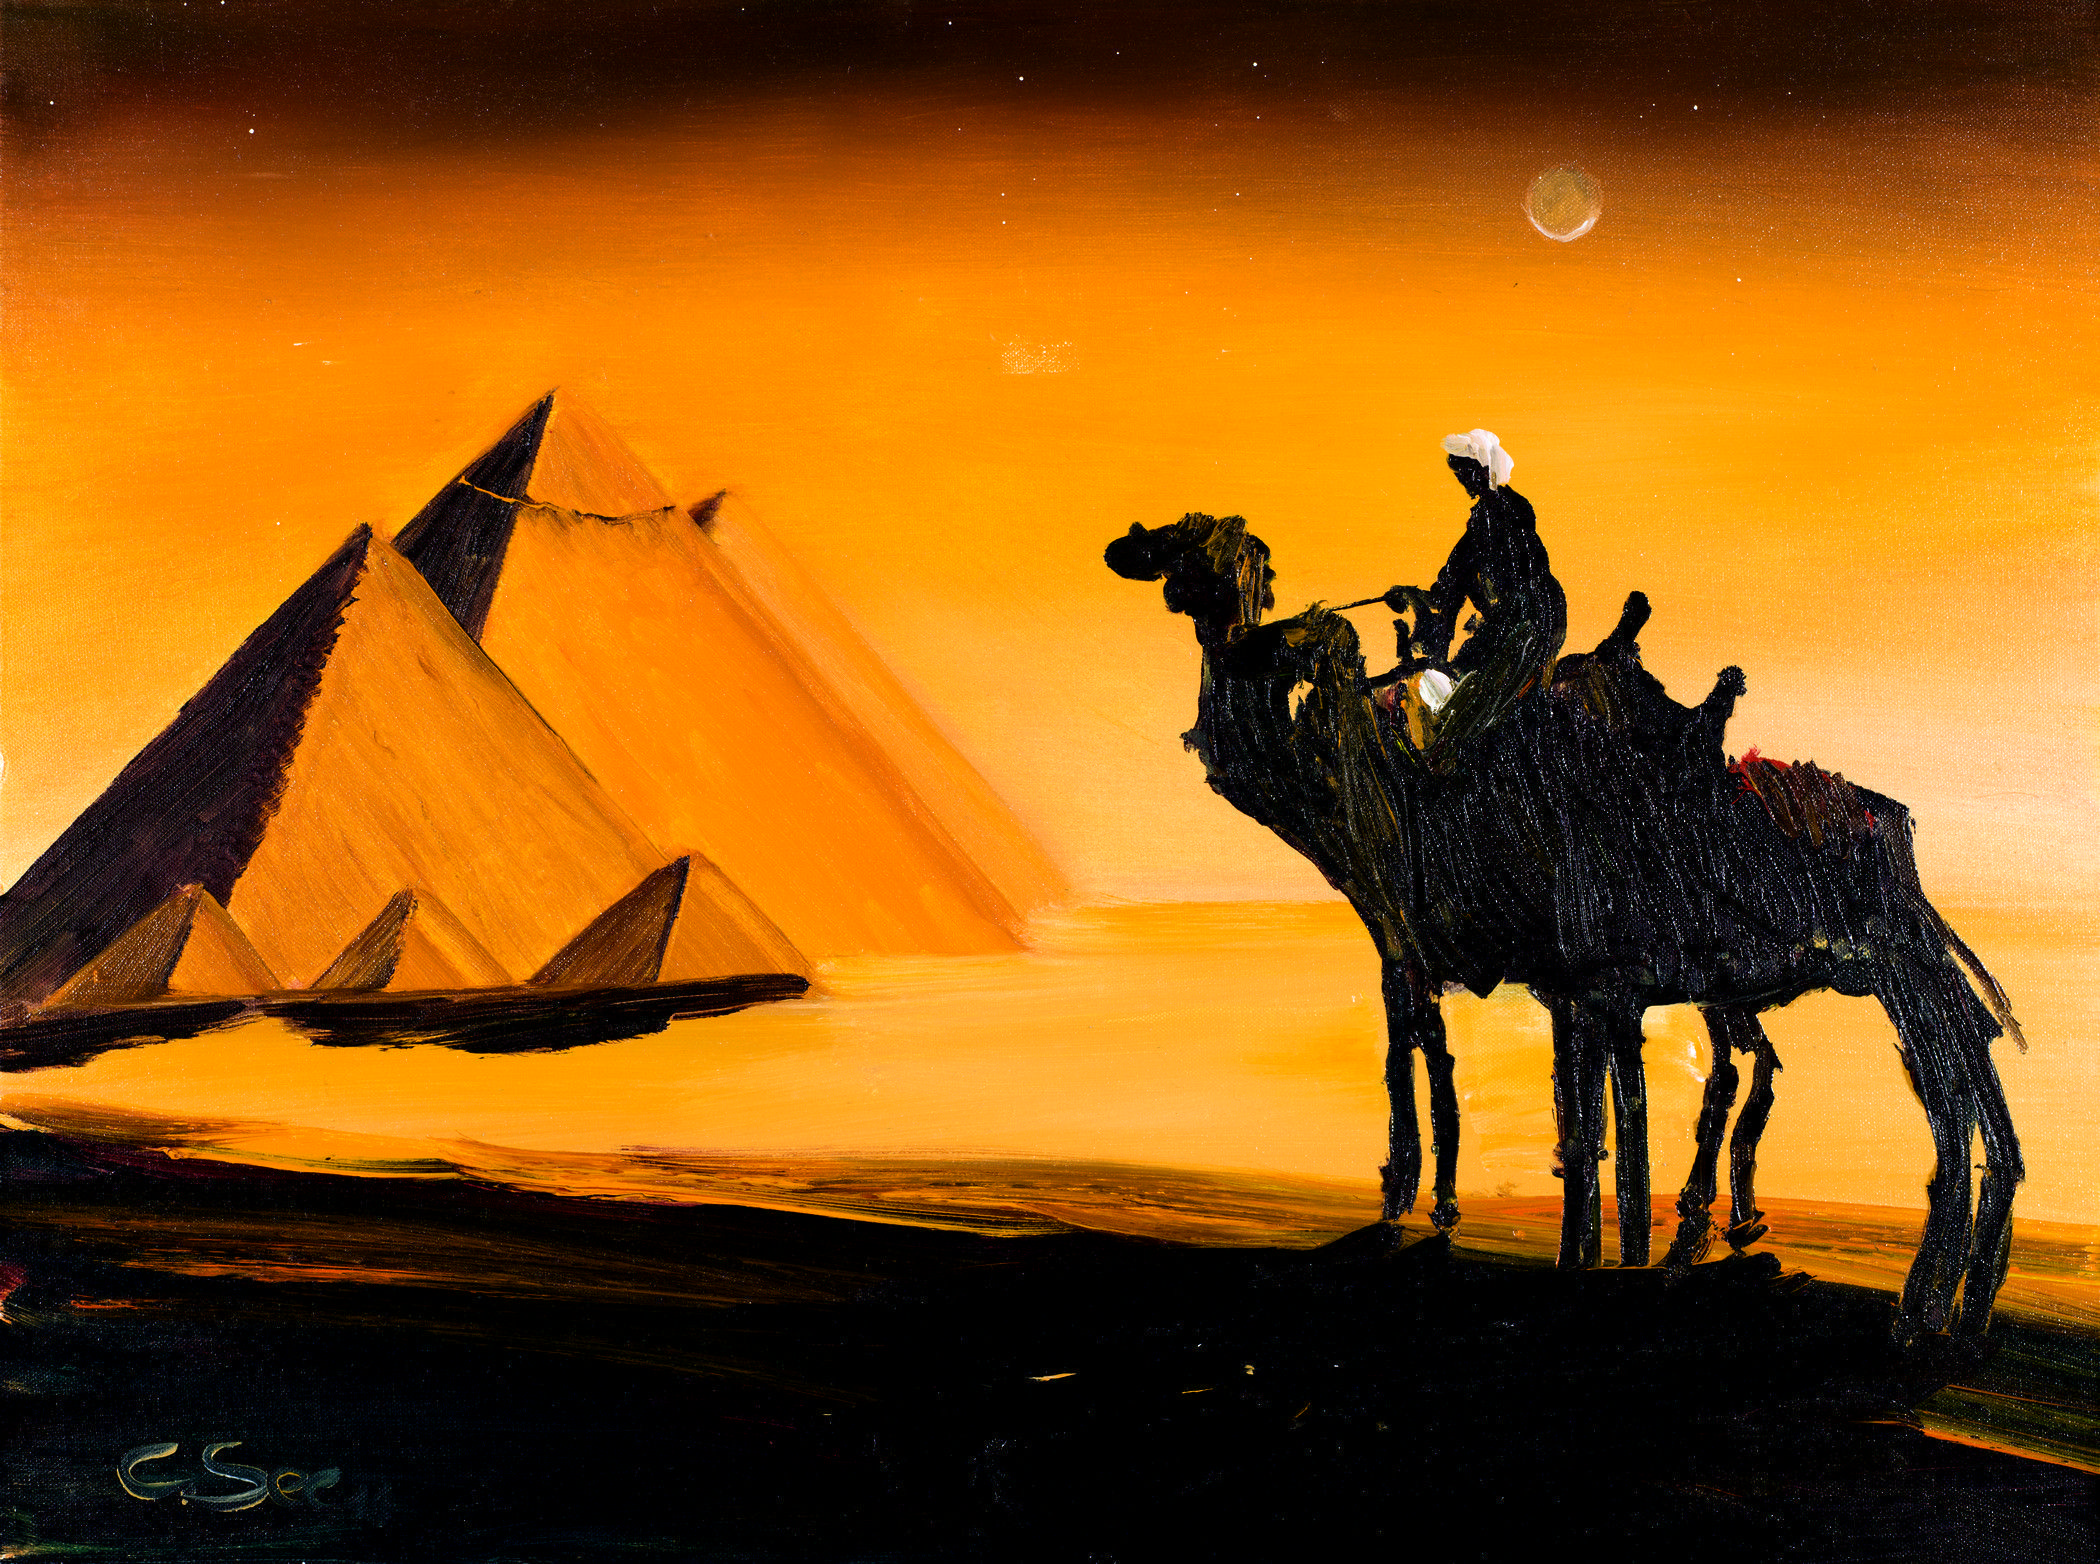 The pyramids of Giza in Egypt oil painting by Christian Seebauer